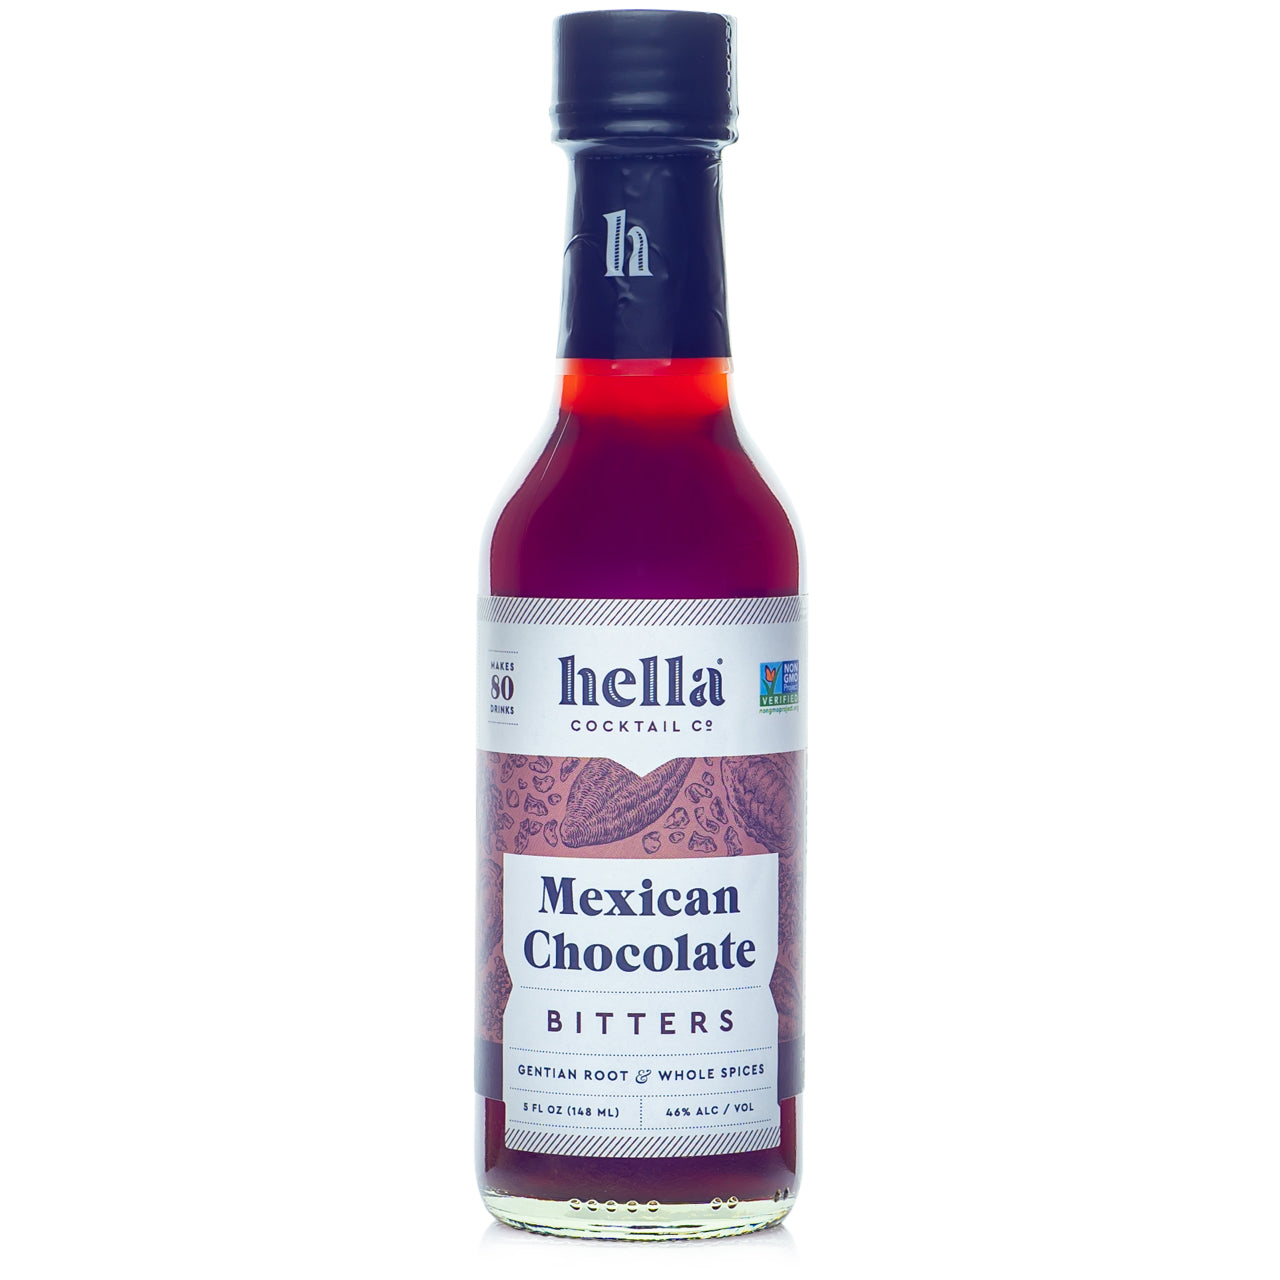 Hella Bitters Mexican Chocolate Bitters